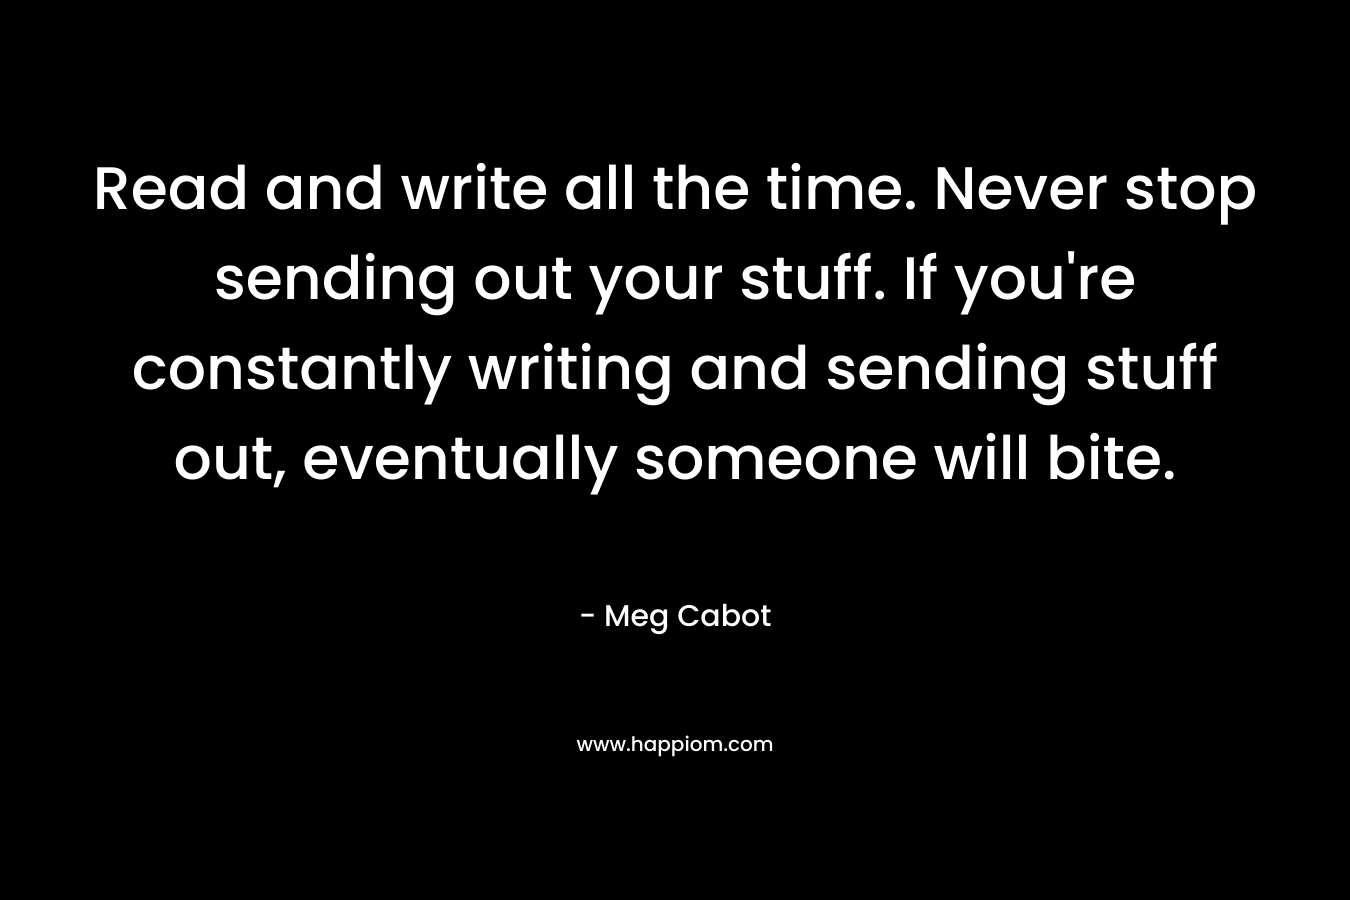 Read and write all the time. Never stop sending out your stuff. If you’re constantly writing and sending stuff out, eventually someone will bite. – Meg Cabot